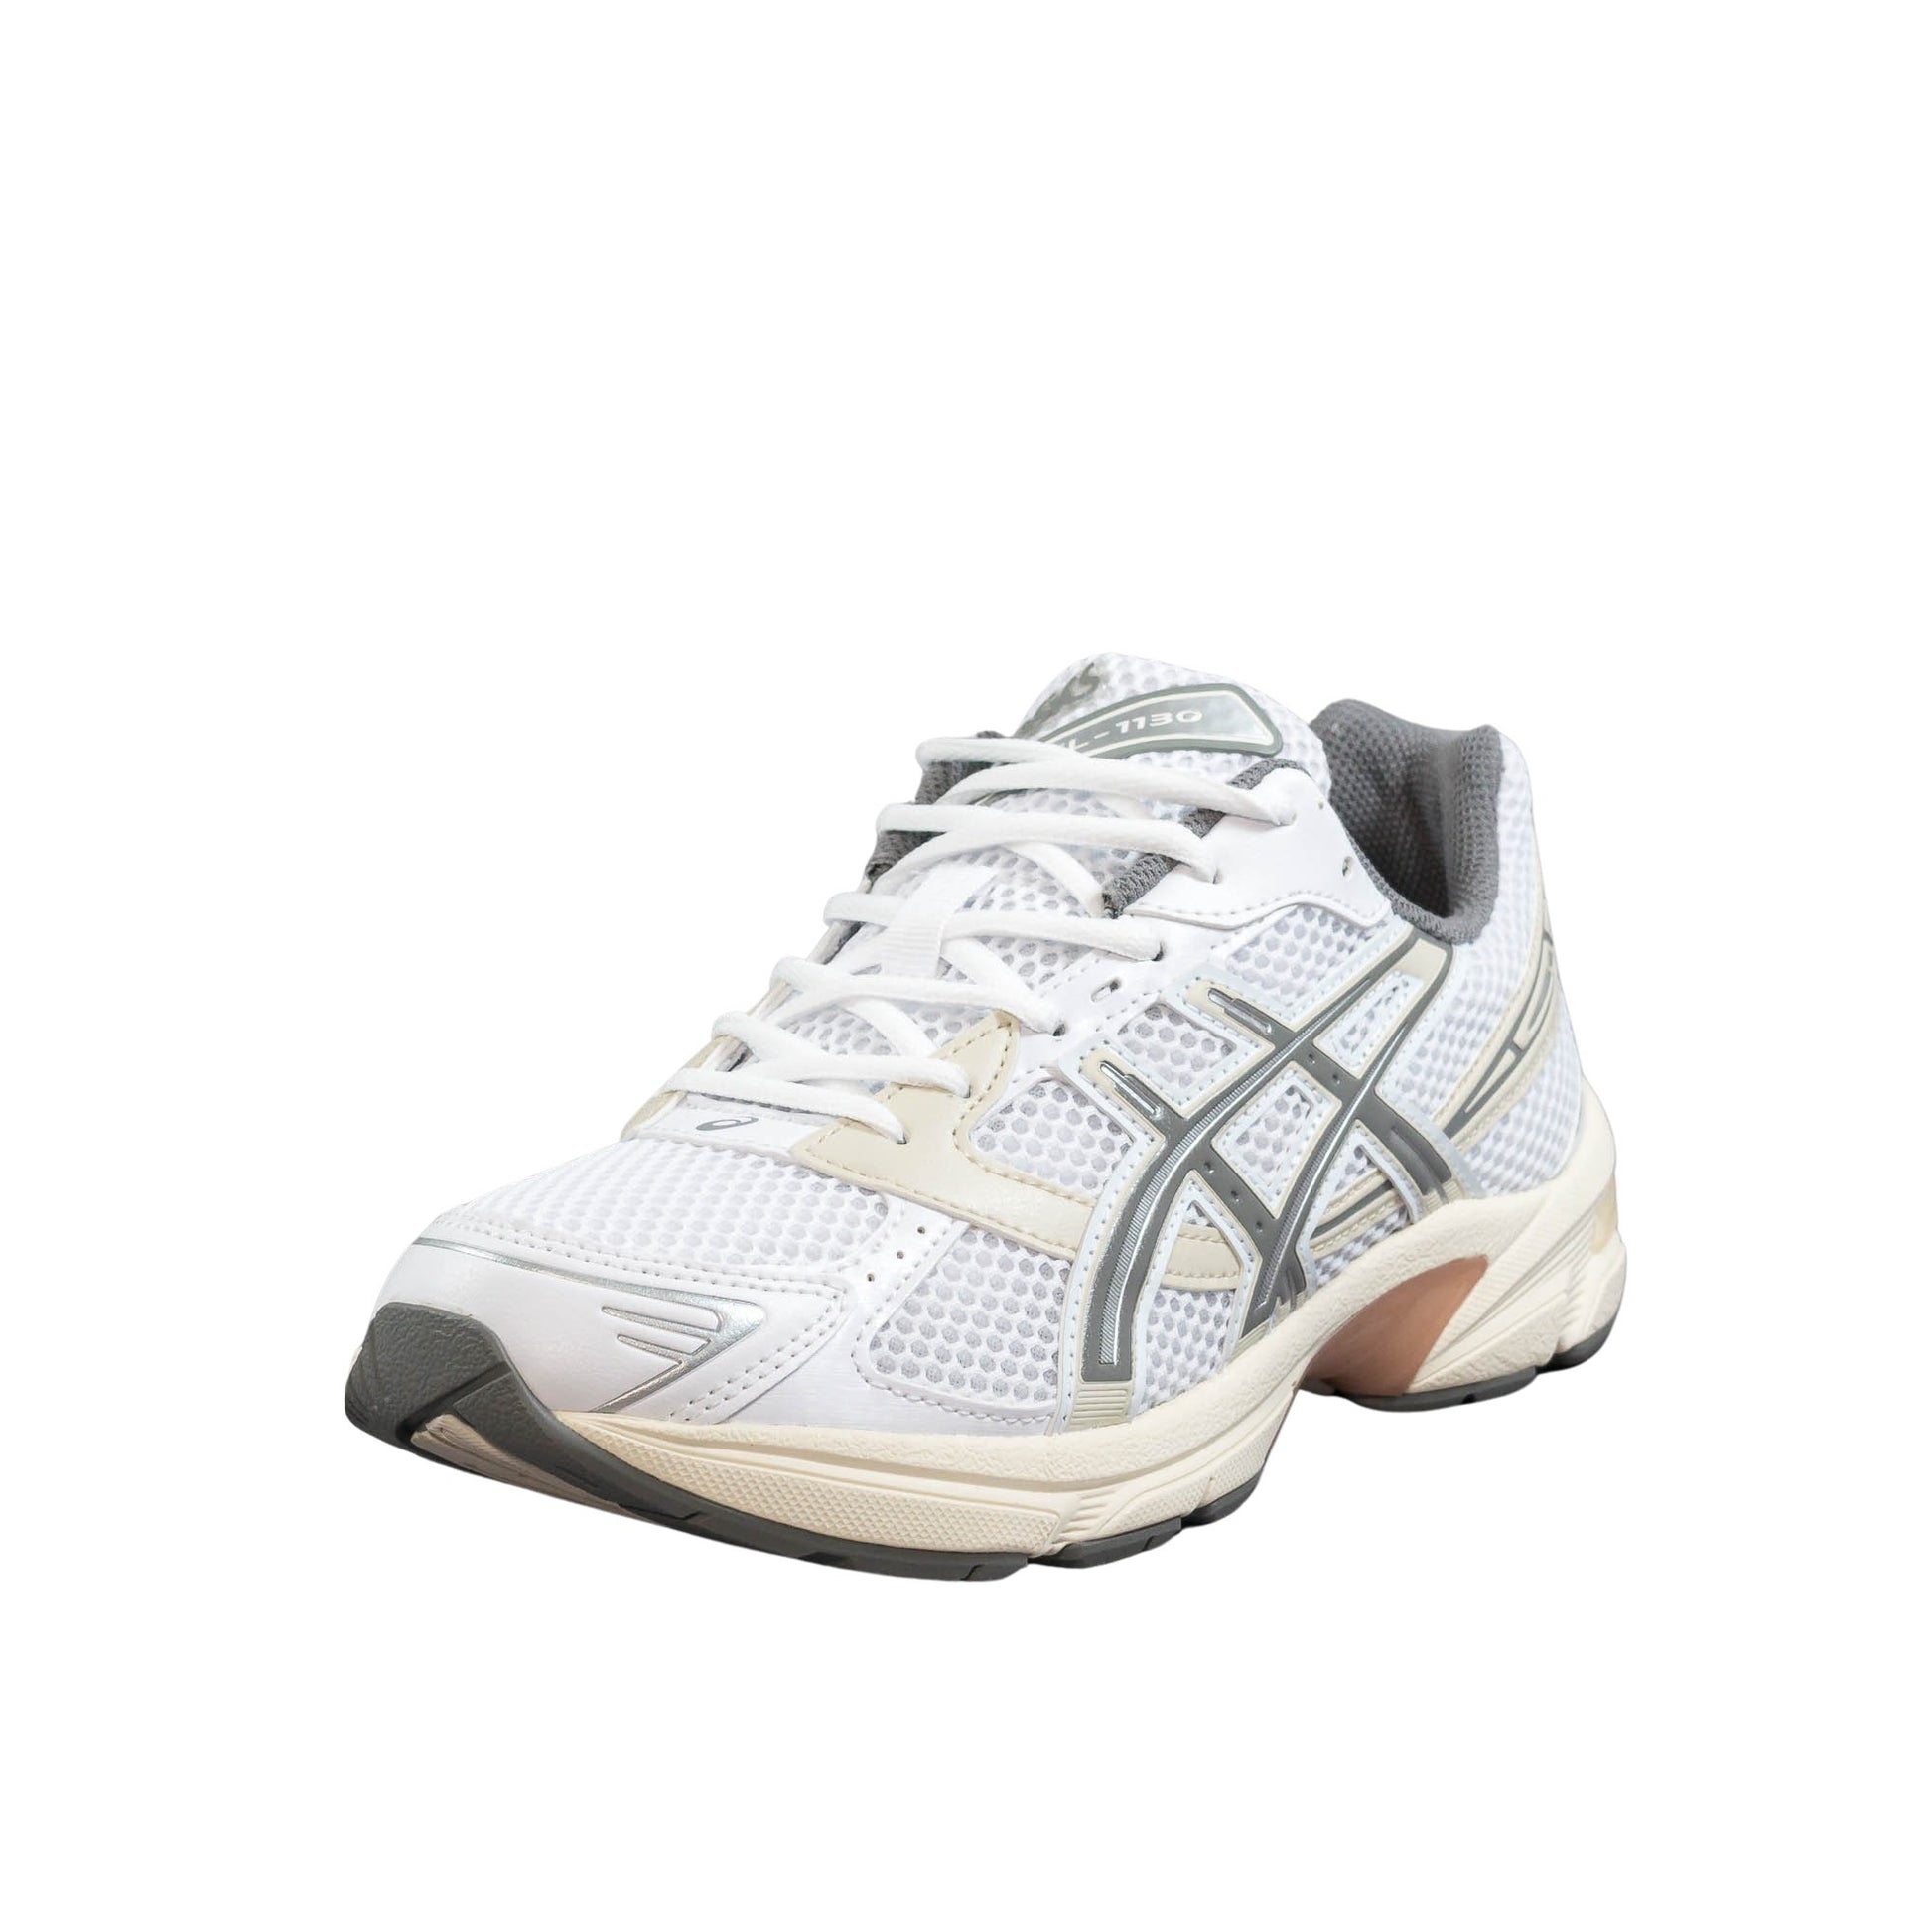 Asics Sportstyle Gel-1130 (1201A256-112) Goldjunge-Store – Weiss